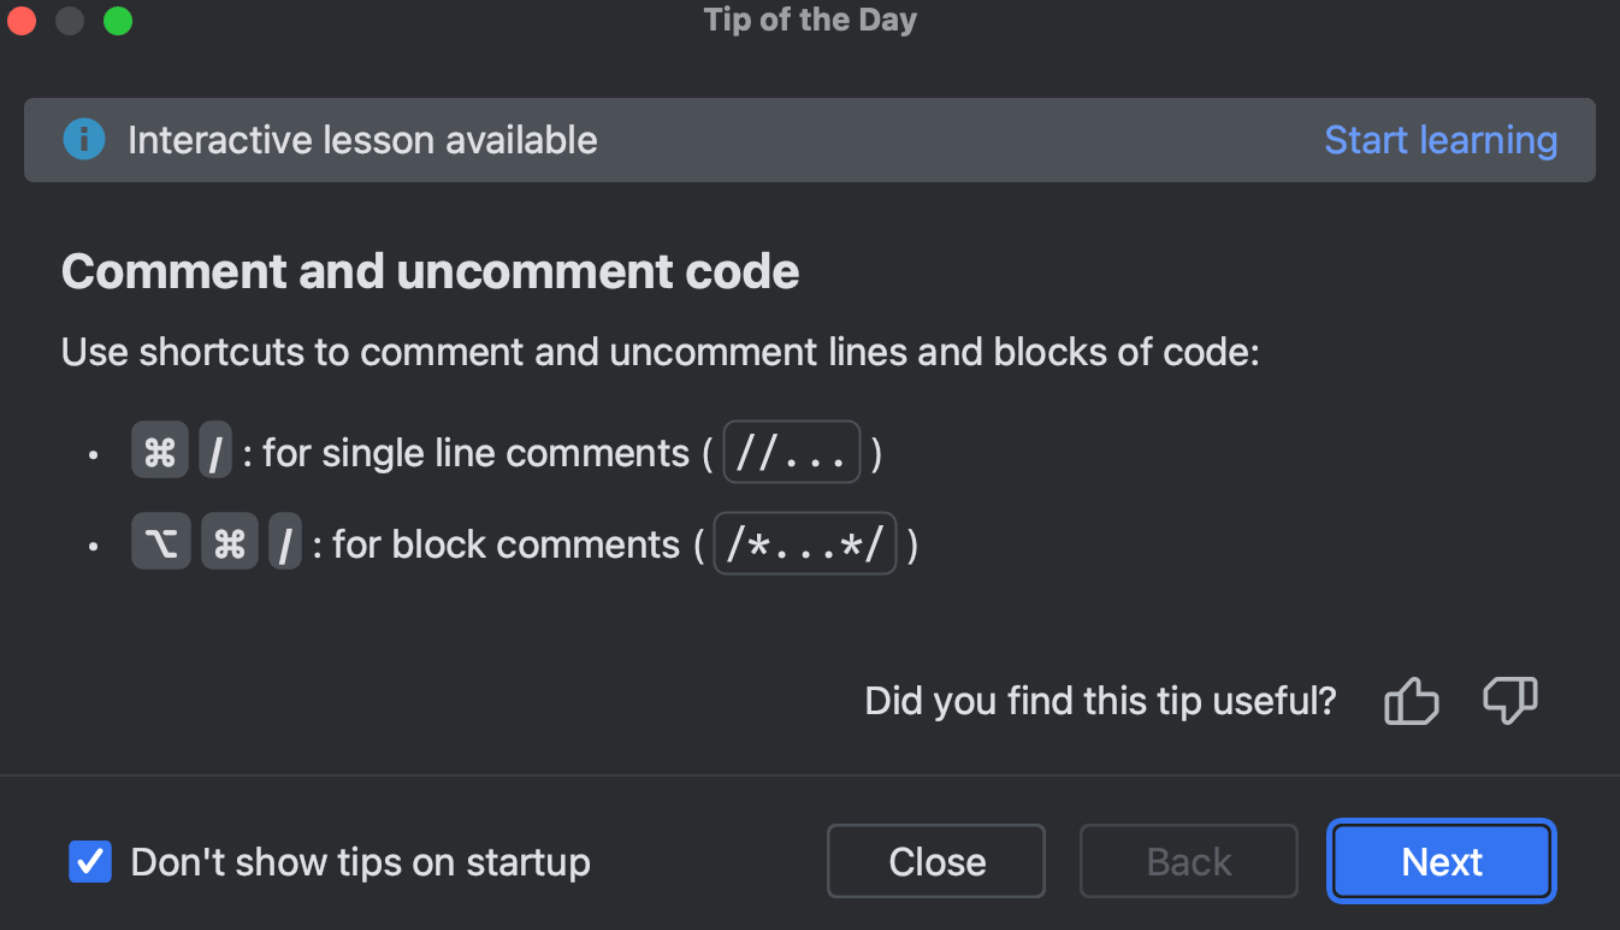 https://www.jetbrains.com/pycharm/whatsnew/img/2022.3/05_UX_tips_of_the_day.png